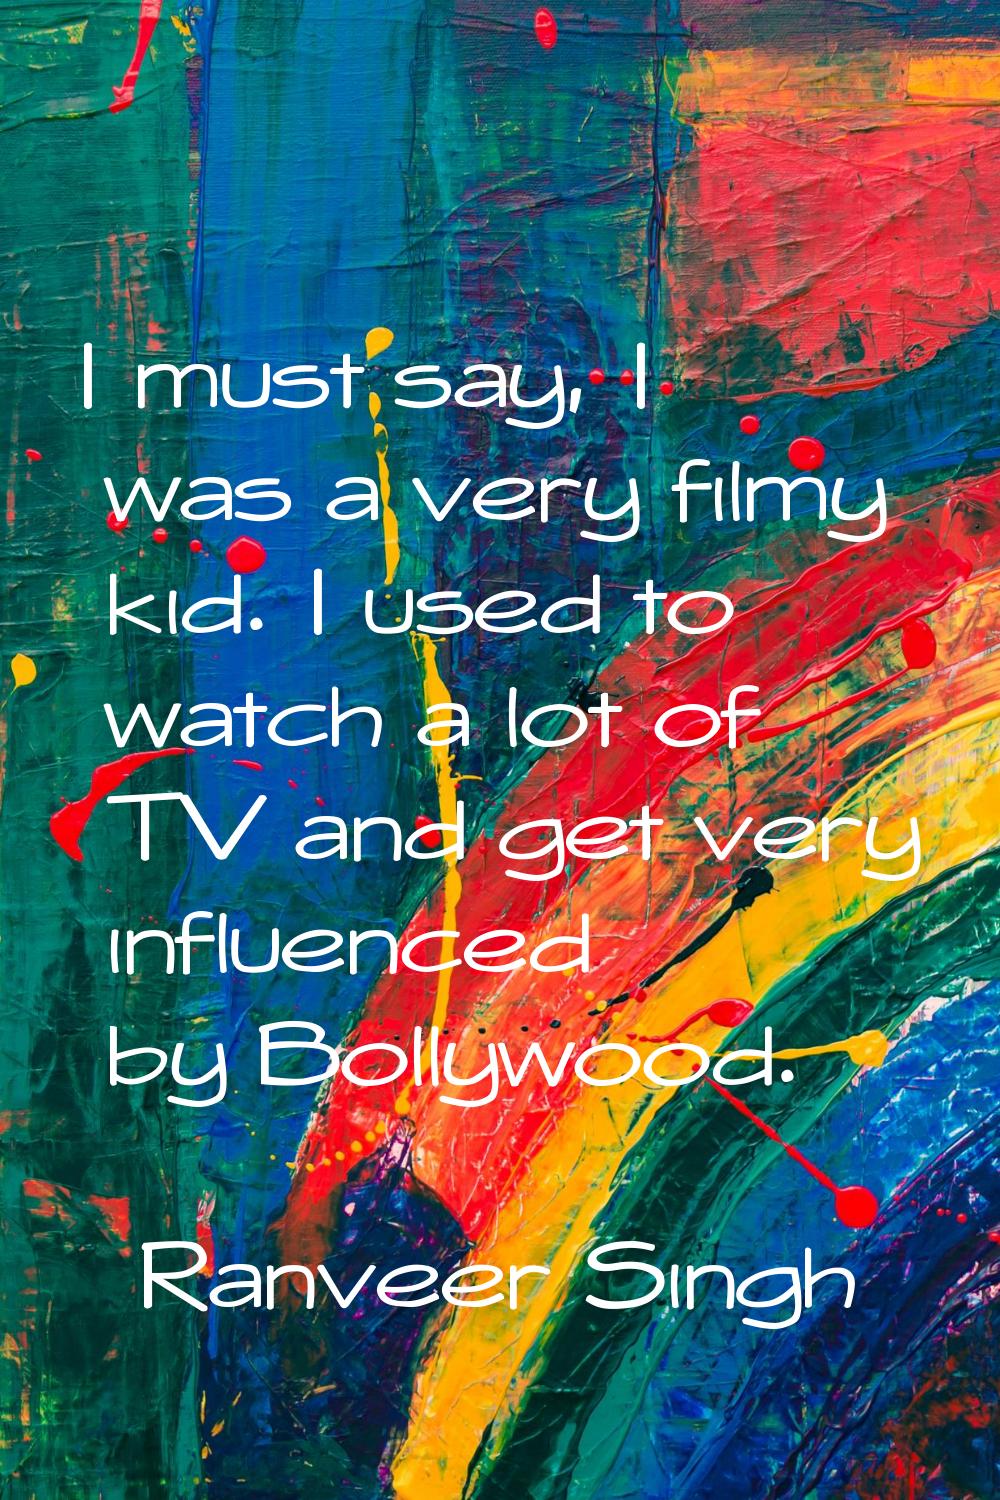 I must say, I was a very filmy kid. I used to watch a lot of TV and get very influenced by Bollywoo